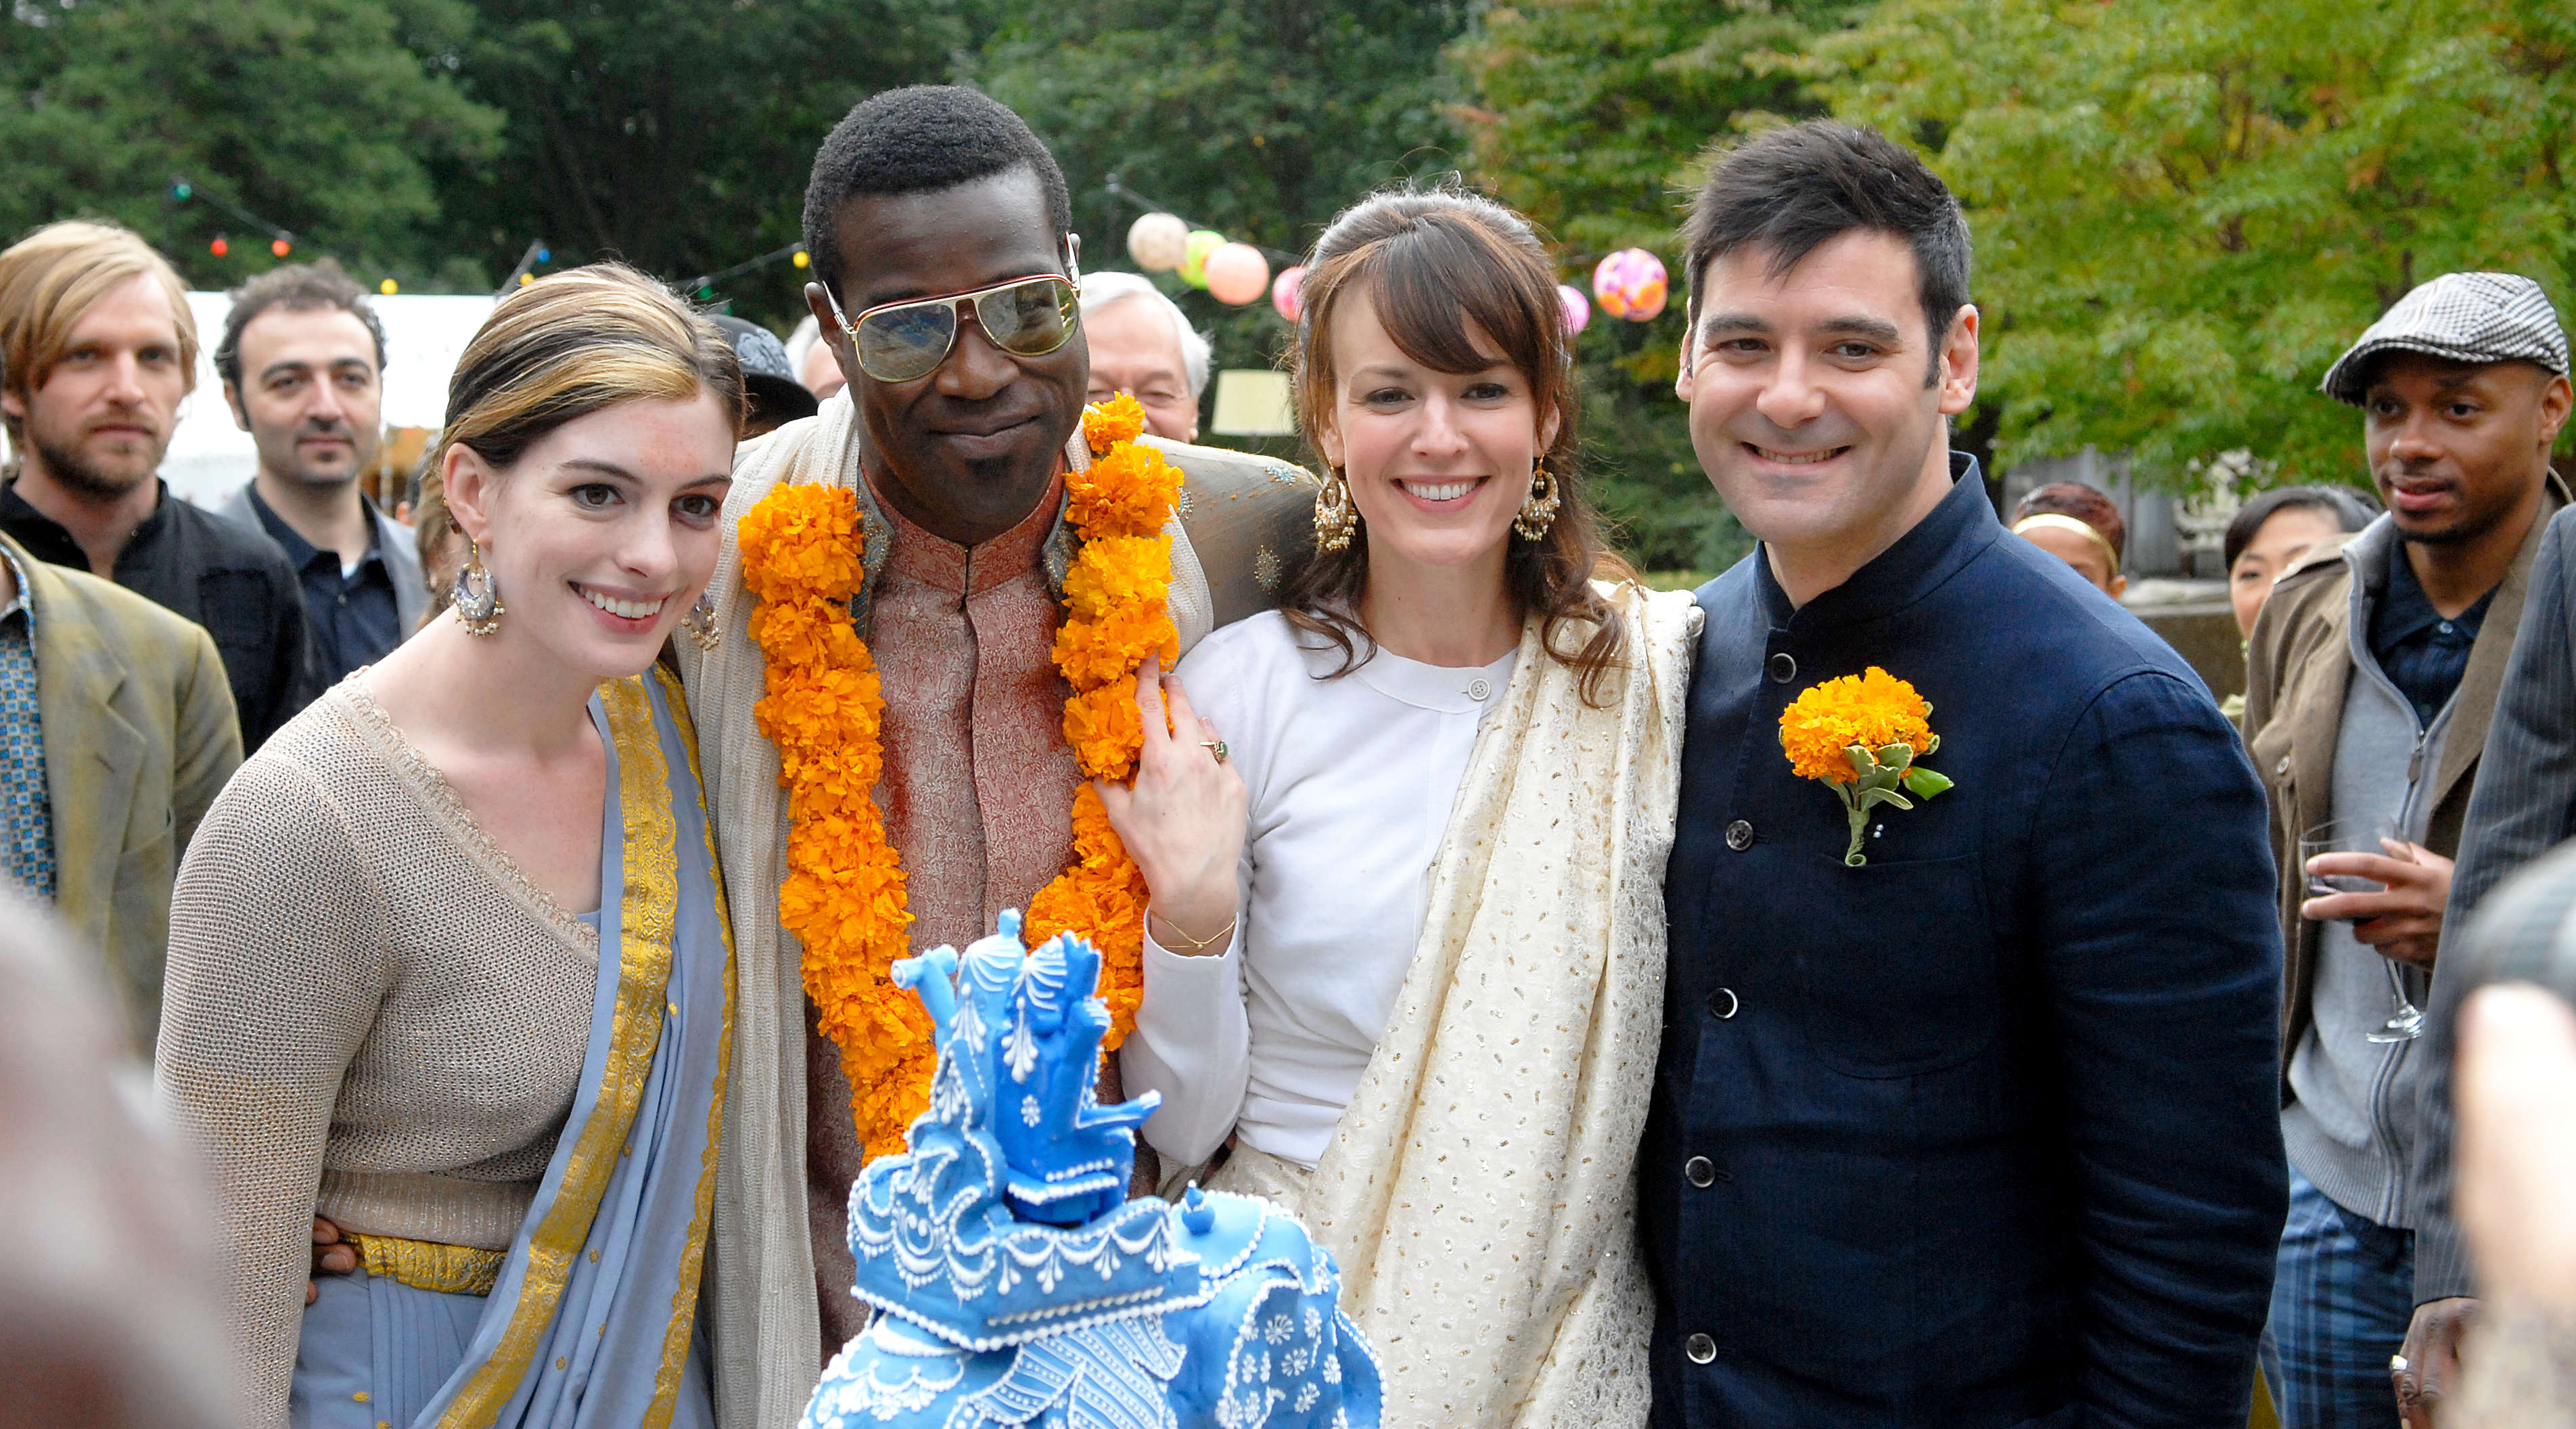 Anne Hathaway, Tunde Adebimpe, Rosemarie DeWiktt and Mather Zickel in Sony Pictures Classics' Rachel Getting Married (2008). Photo by Bob Vergara.